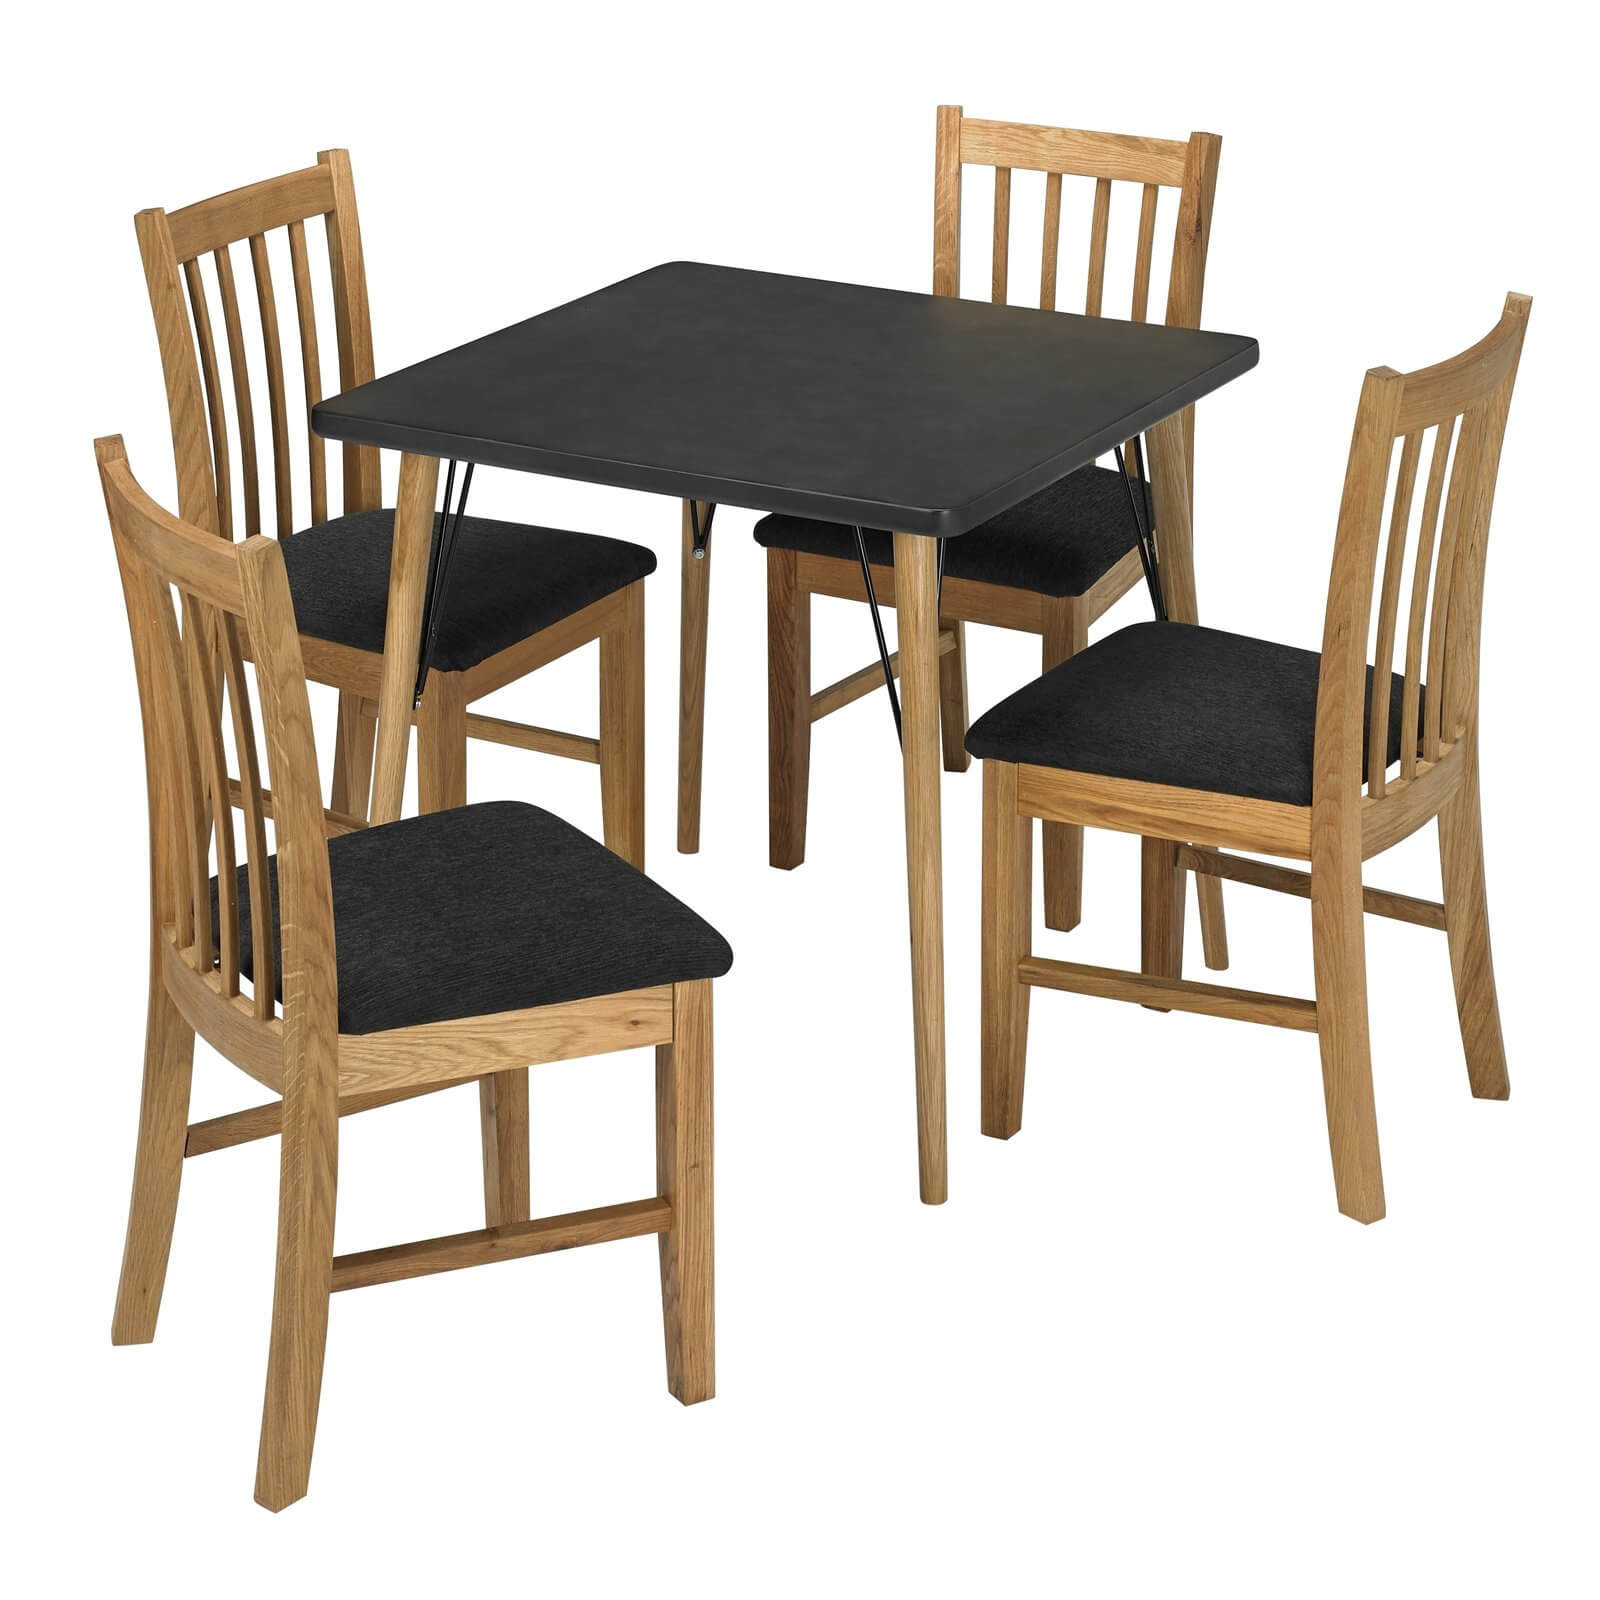 Mercer 4 Seater Dining Set - Brooklyn Dining Chairs